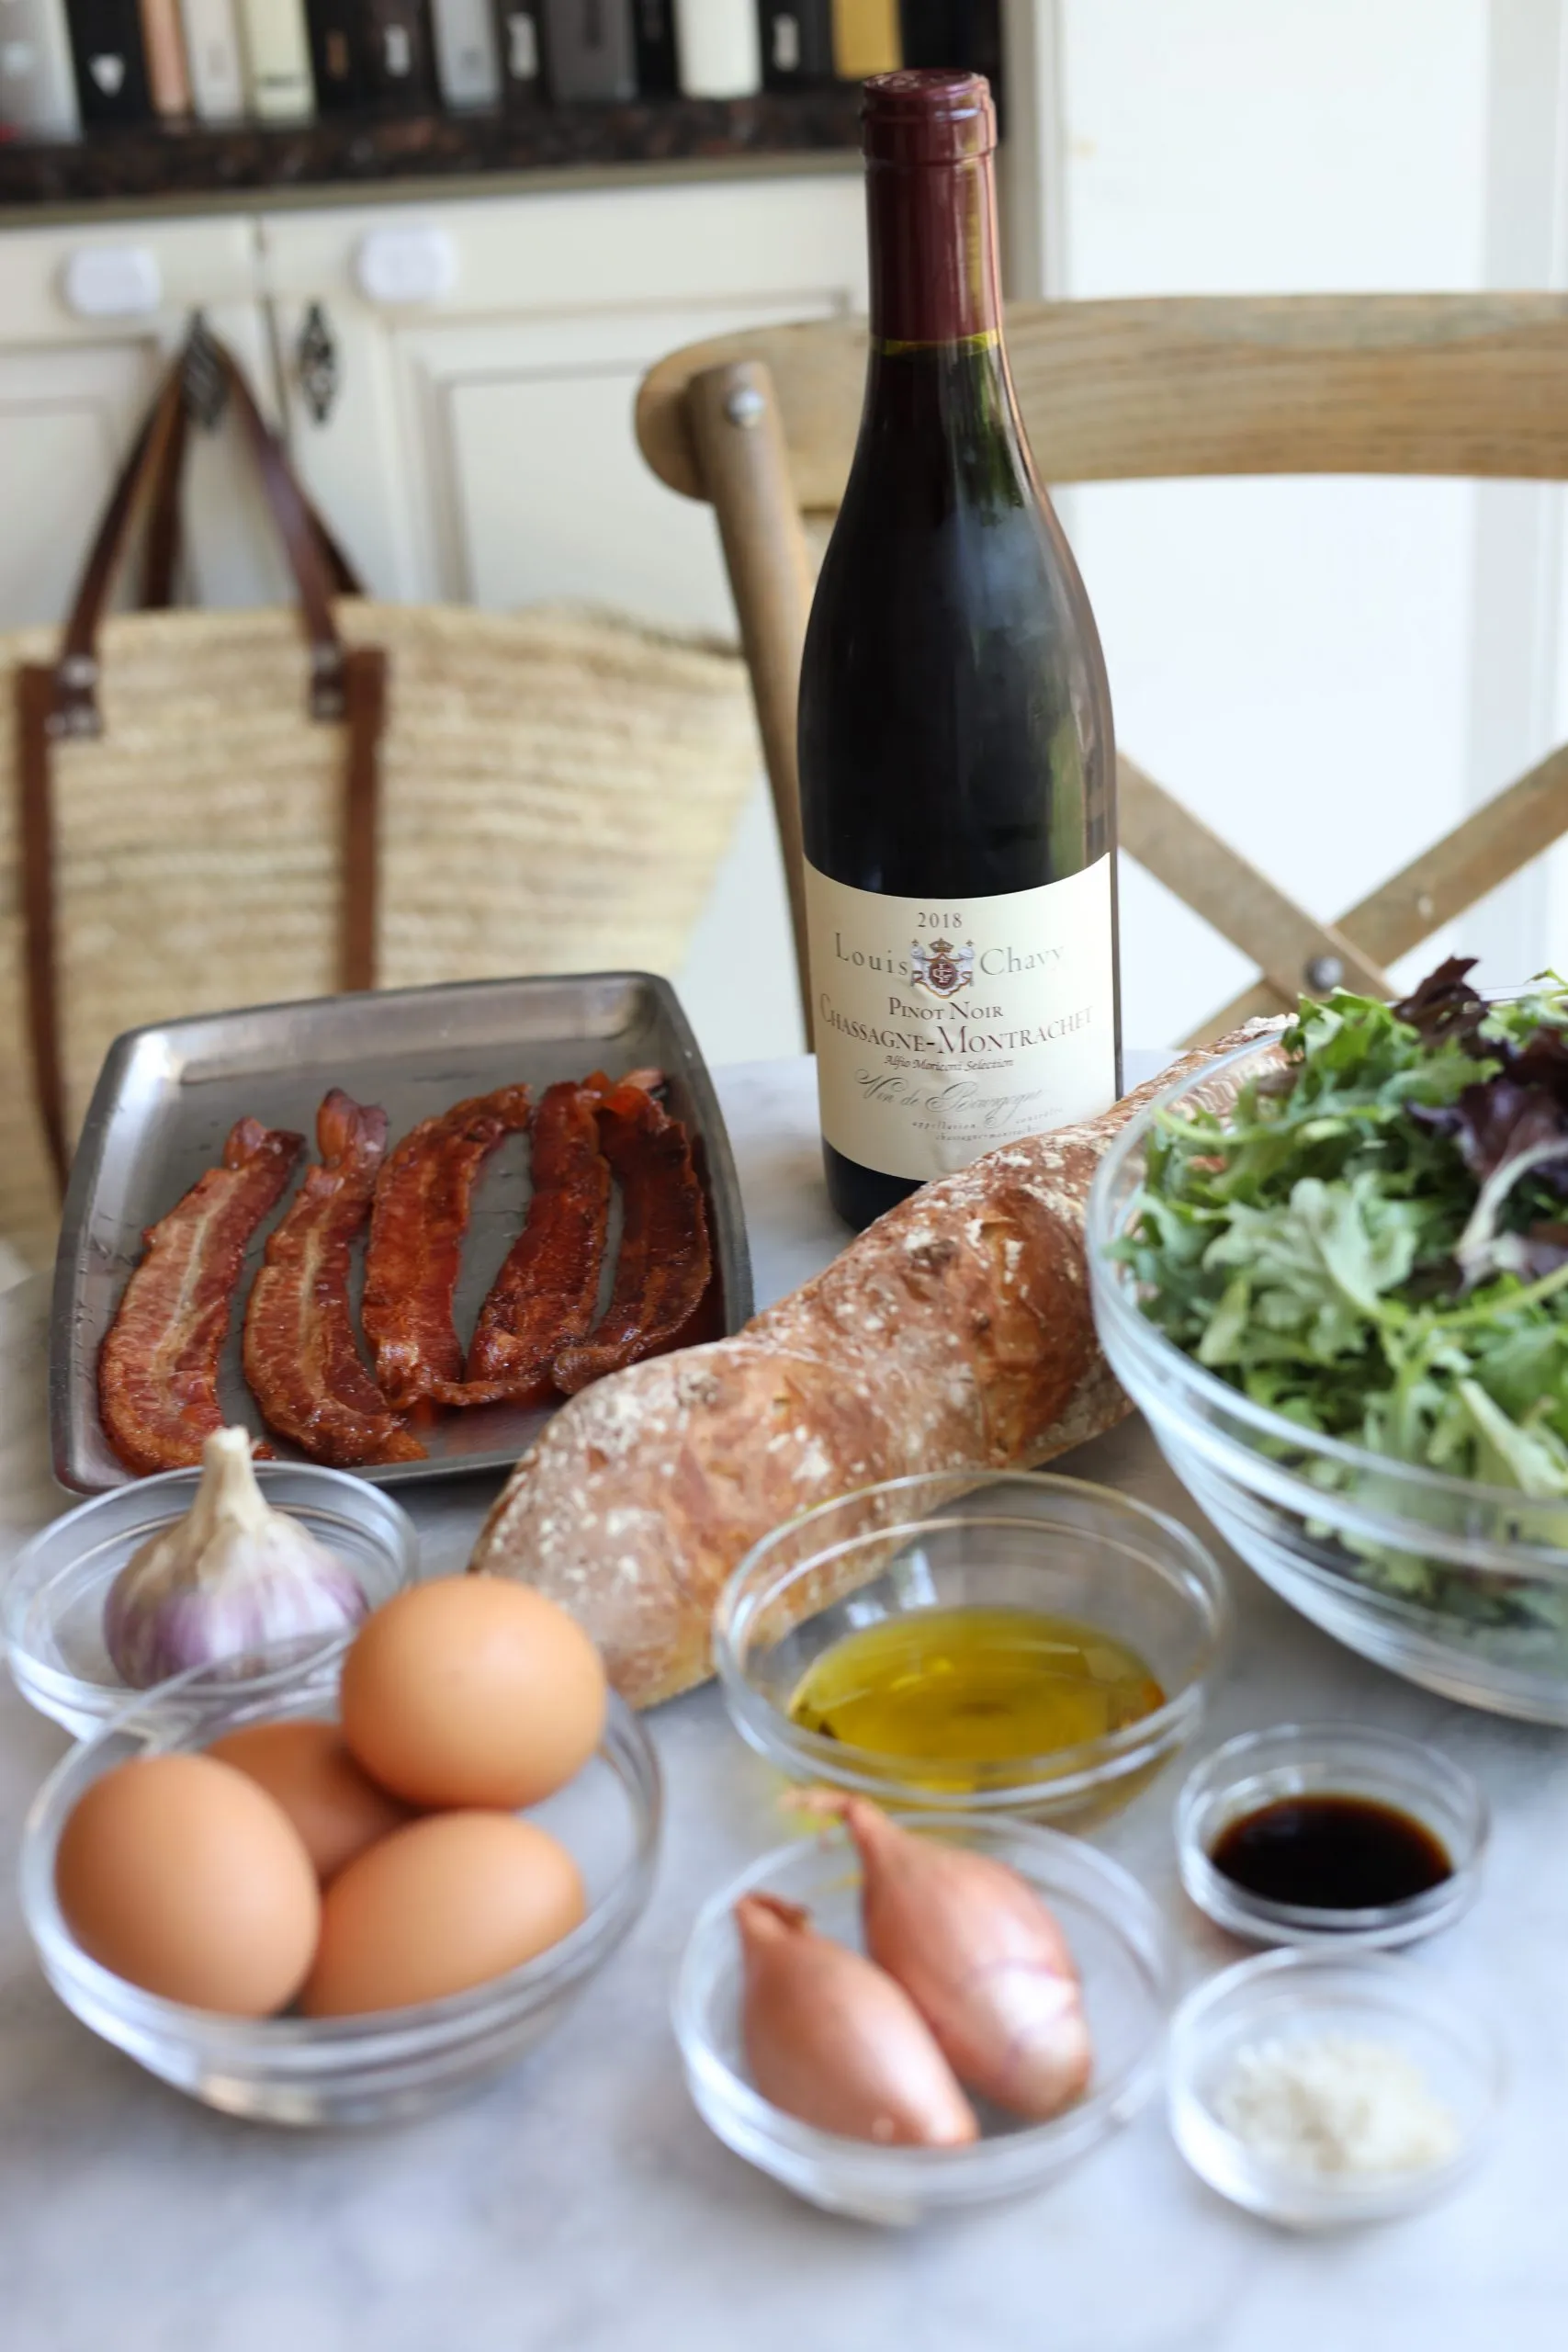 Ingredients for salade lyonnaise: bacon, garlic, eggs, red wine, shallots, french baguette, mixed greens